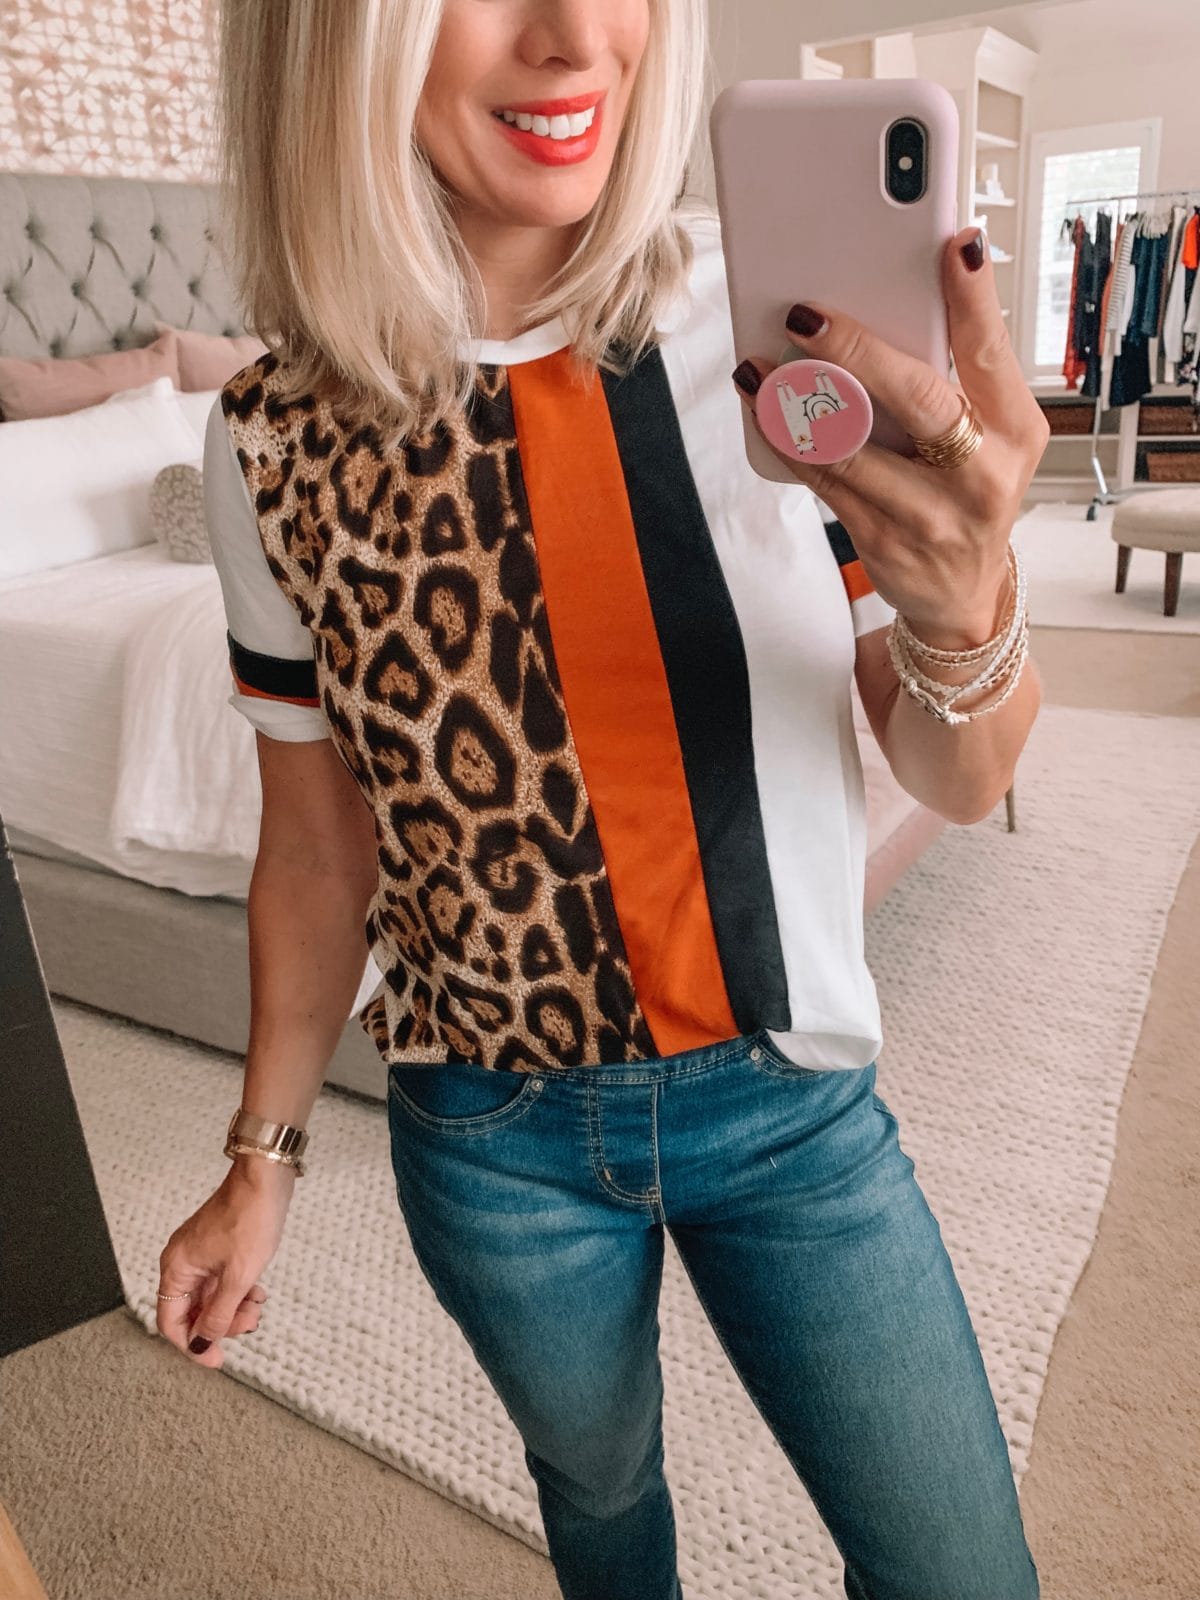 Amazon fashion haul, color block top and jeans 